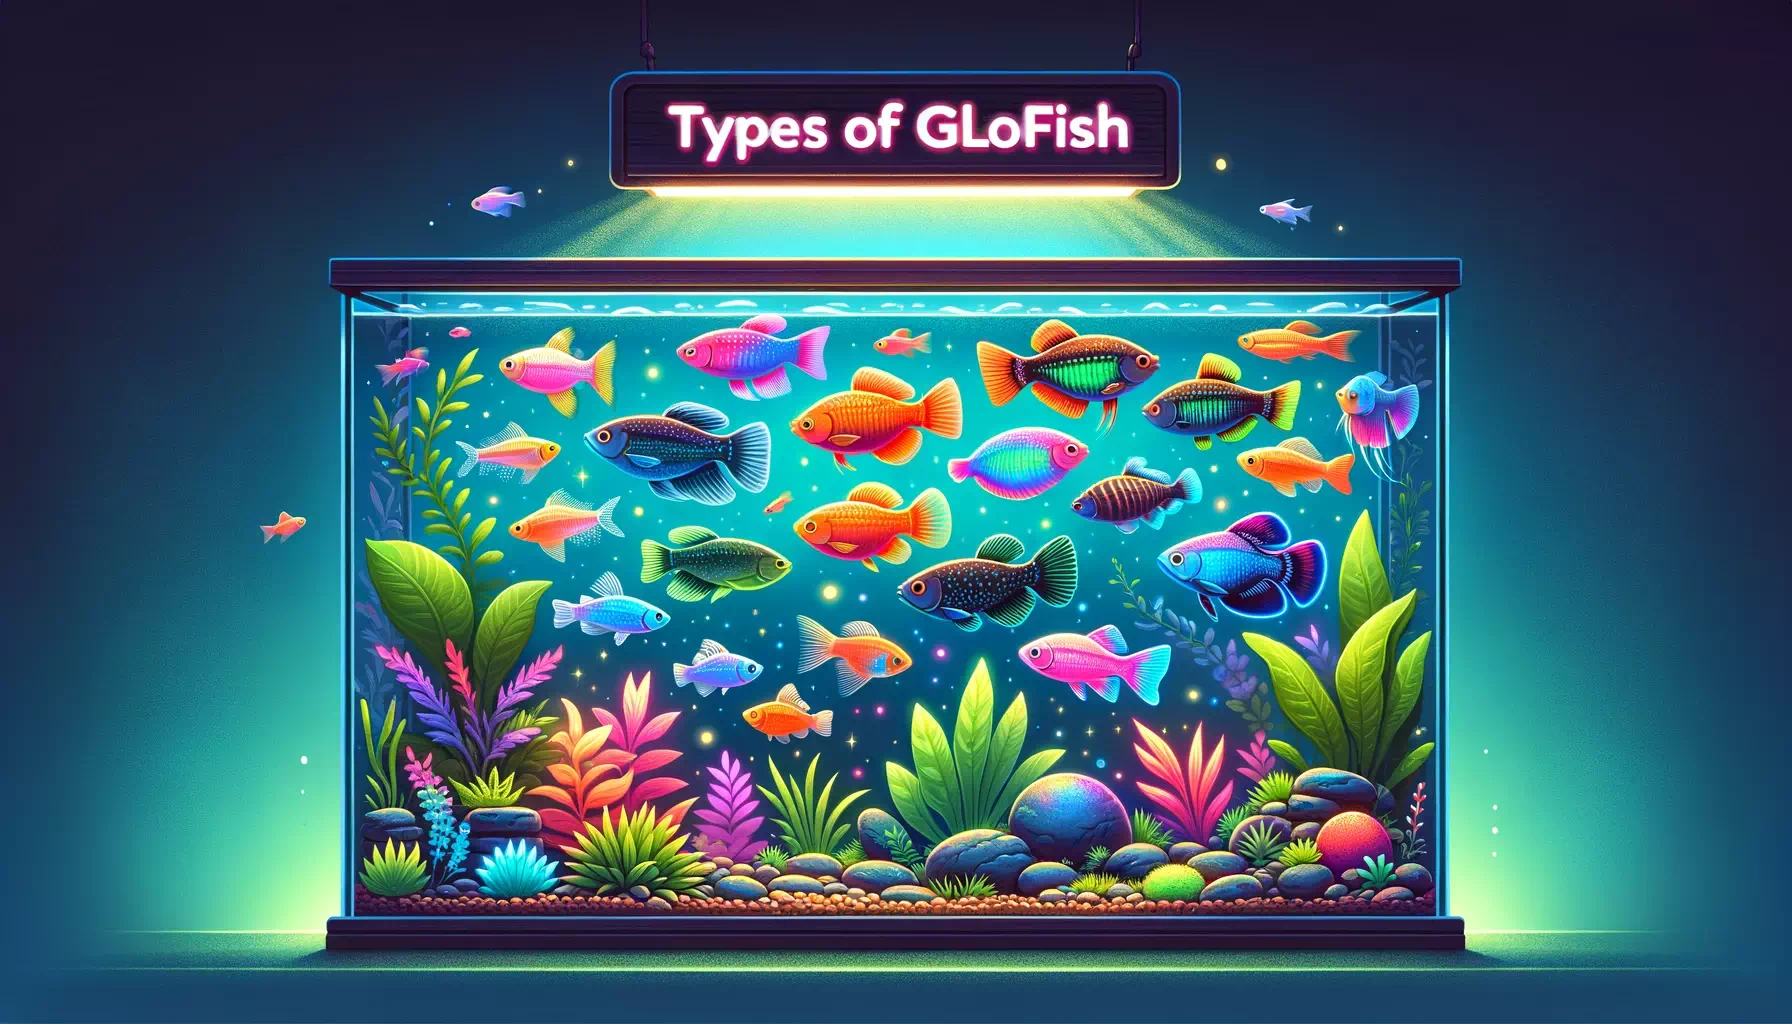 GloFish species swimming in an aquarium, with a label 'Types of GloFish' at the top. The aquarium is beautifully decorate